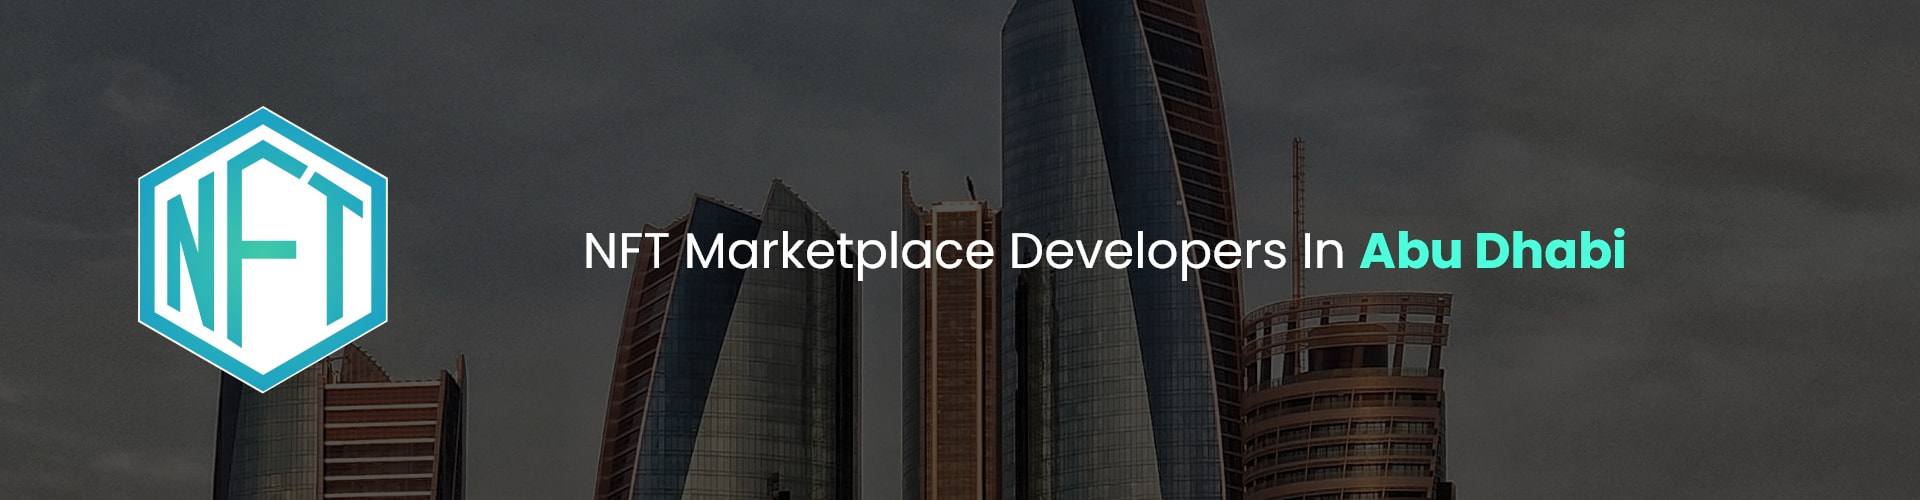 hire nft marketplace developers in abu dhabi